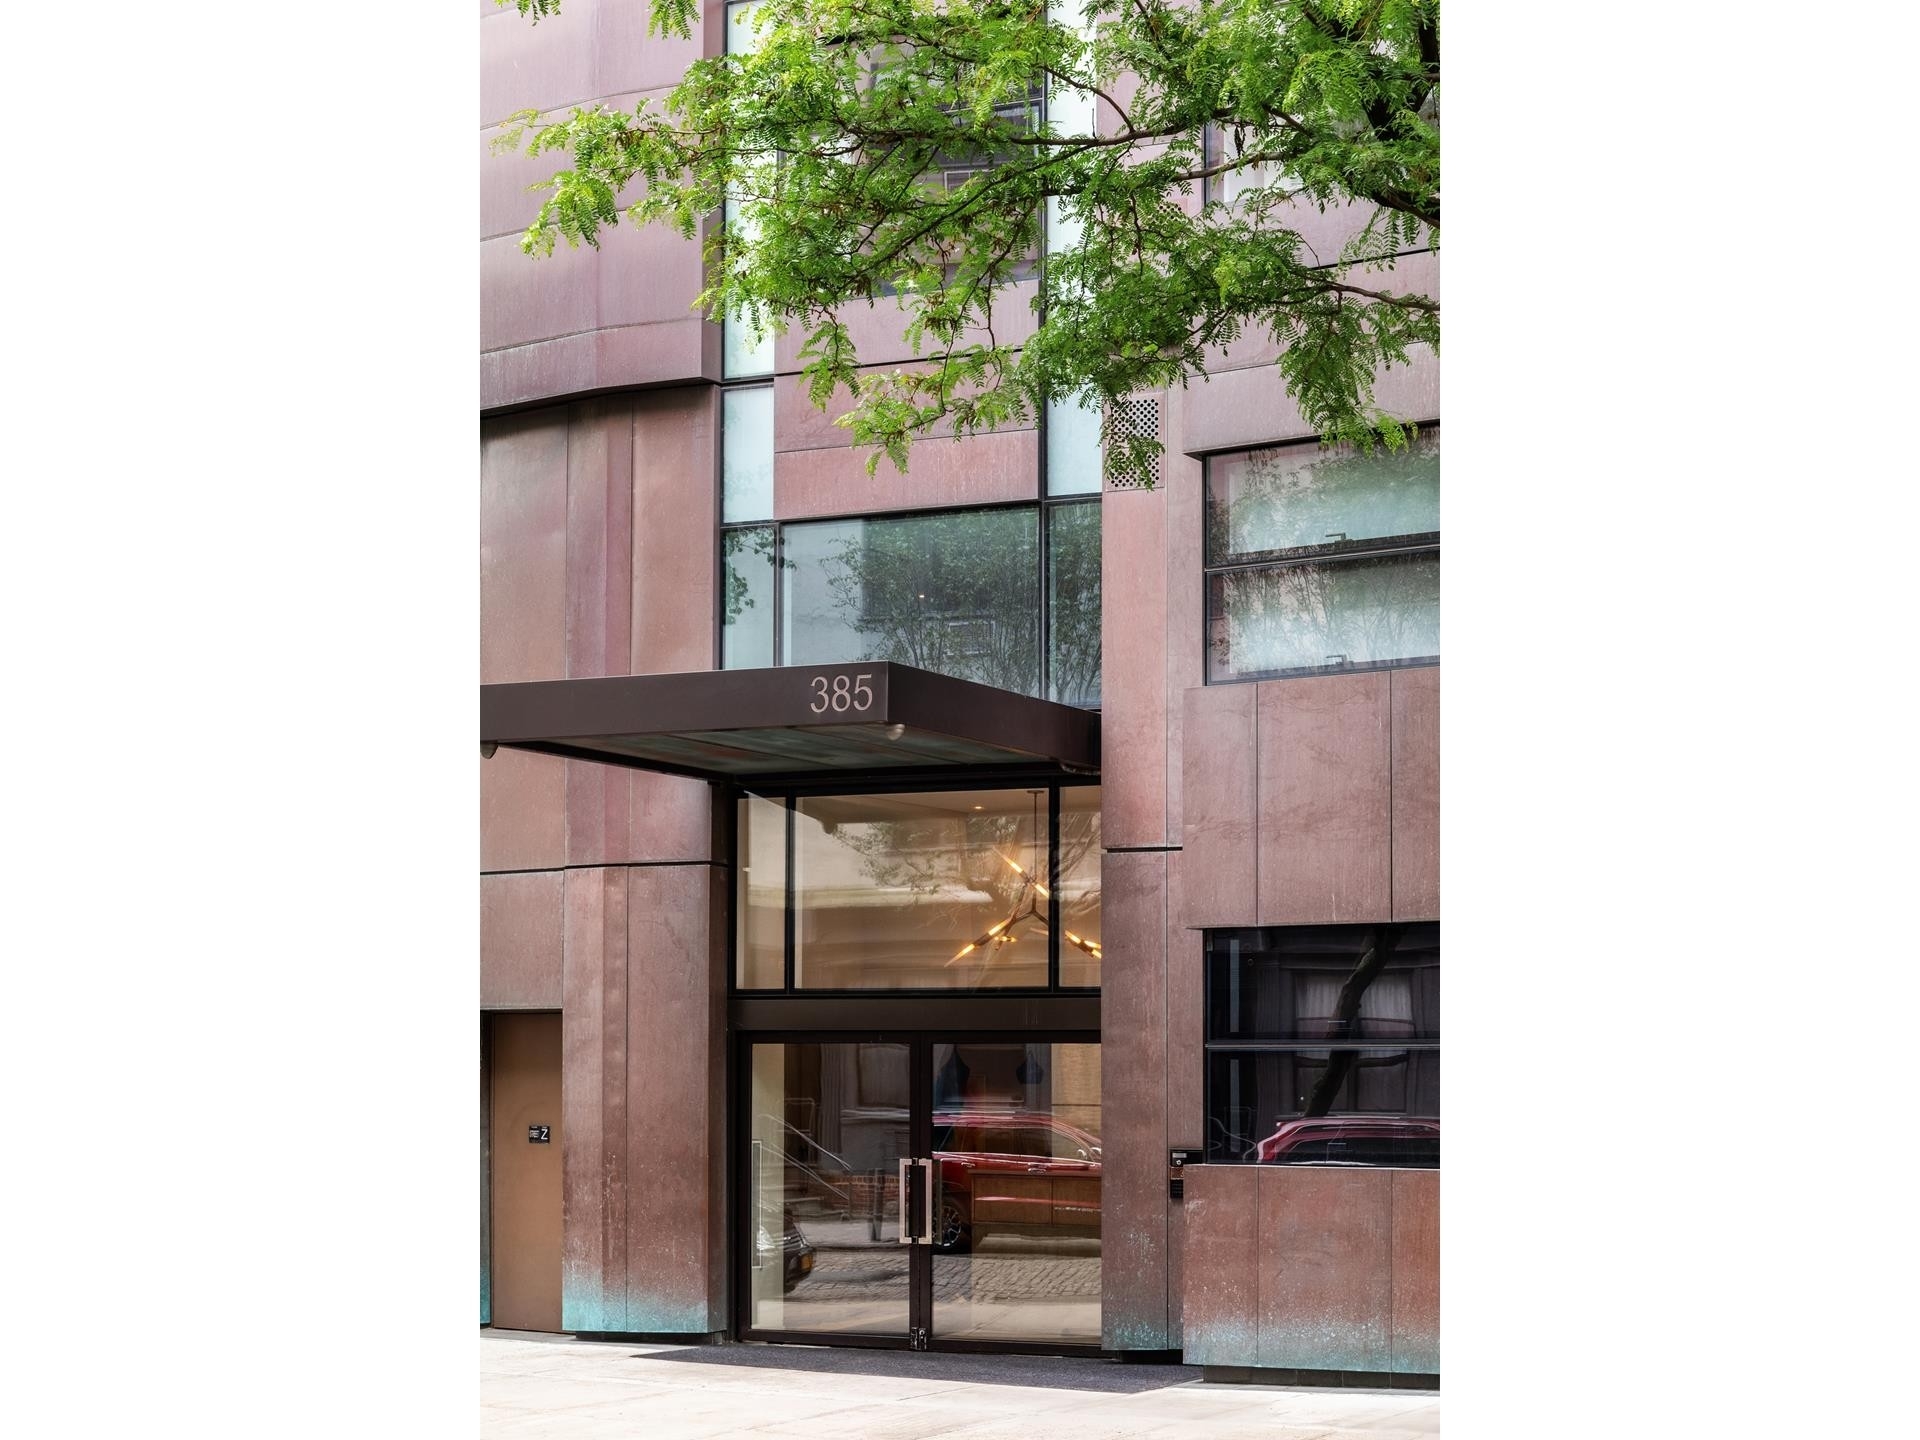 21. Condominiums for Sale at 385 West 12Th, 385 W 12TH ST, PHW West Village, New York, New York 10014